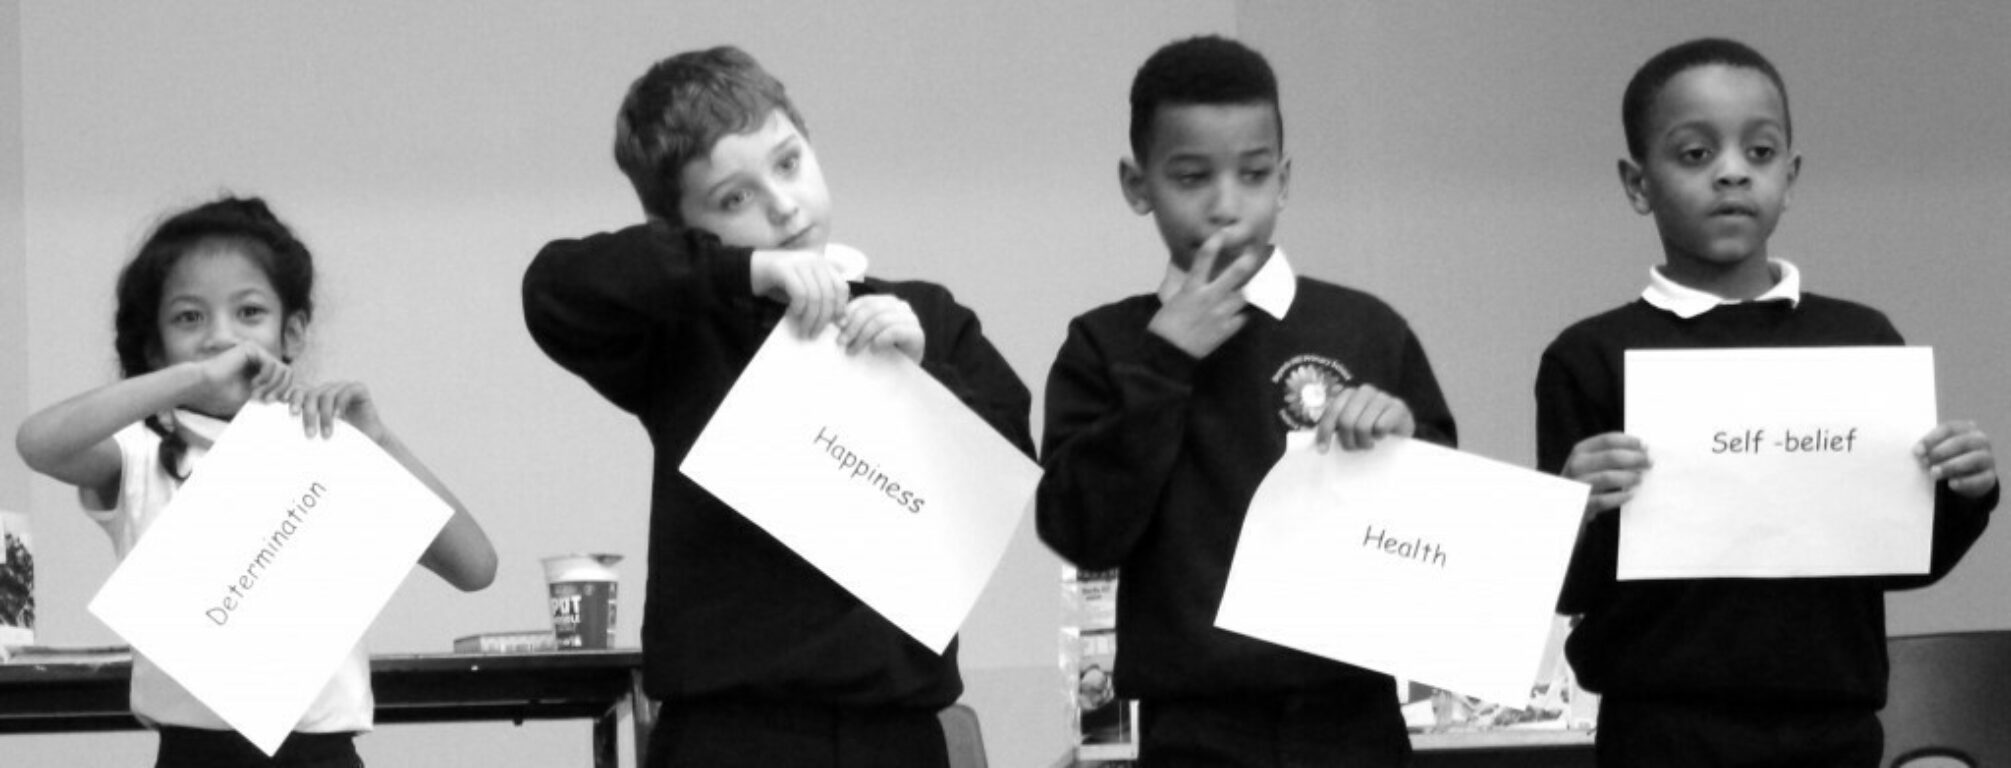 Black and white photo of four children holding cards reading different relevant words to the project.